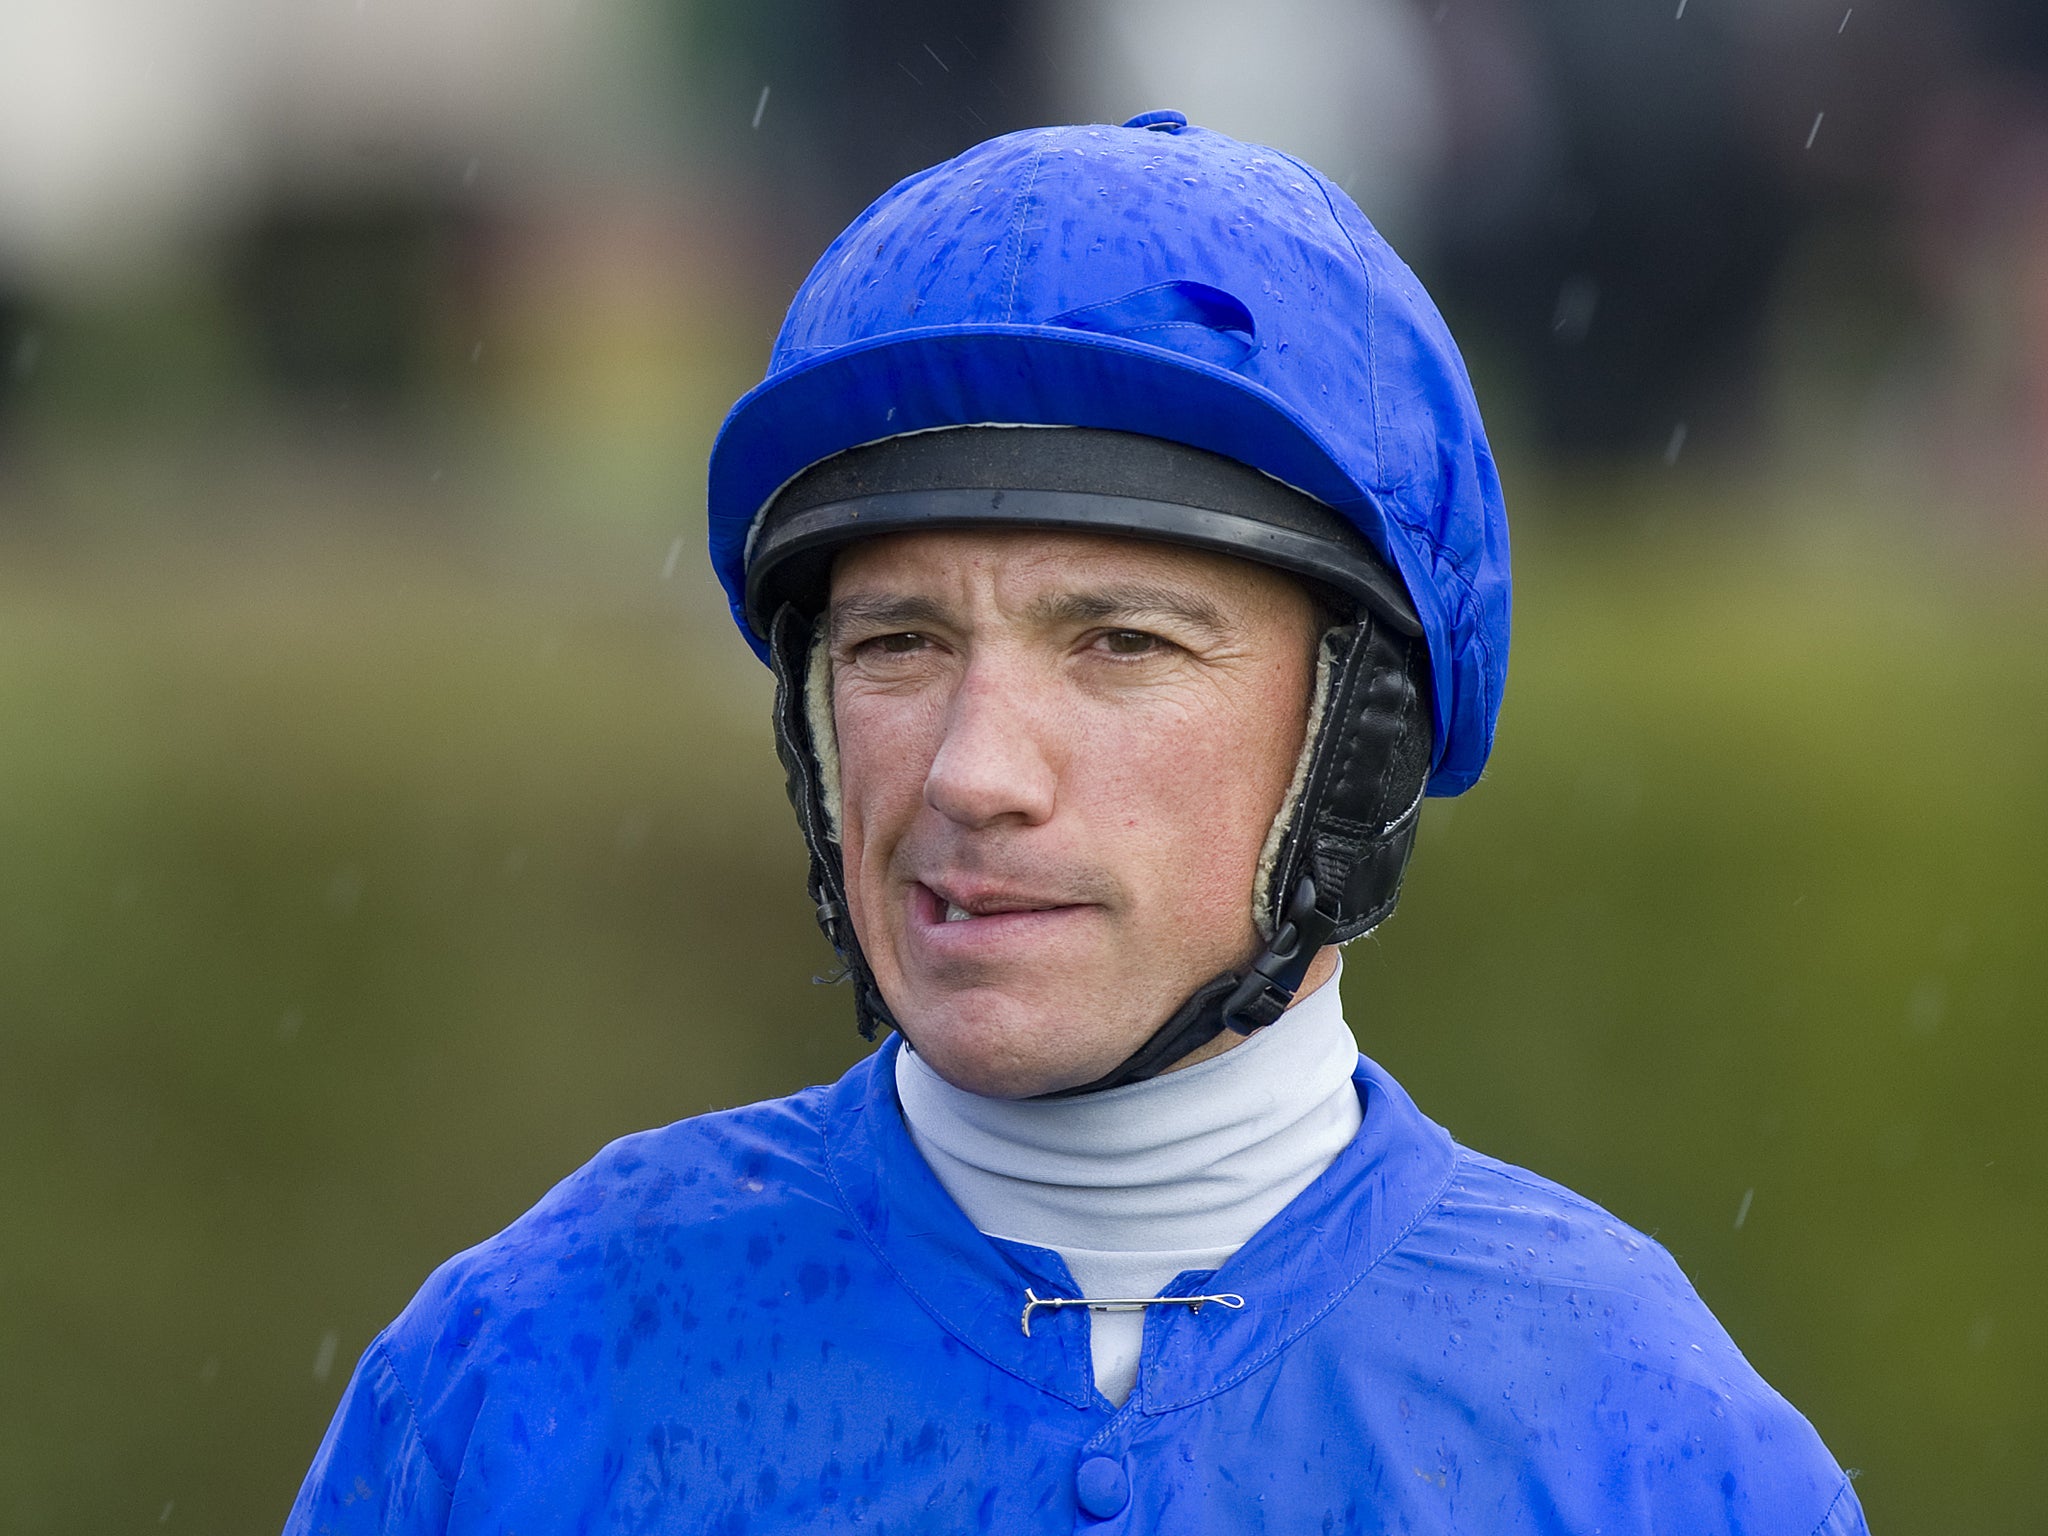 Dettori made the headlines last month when his 18-year association with Godolphin came to an end